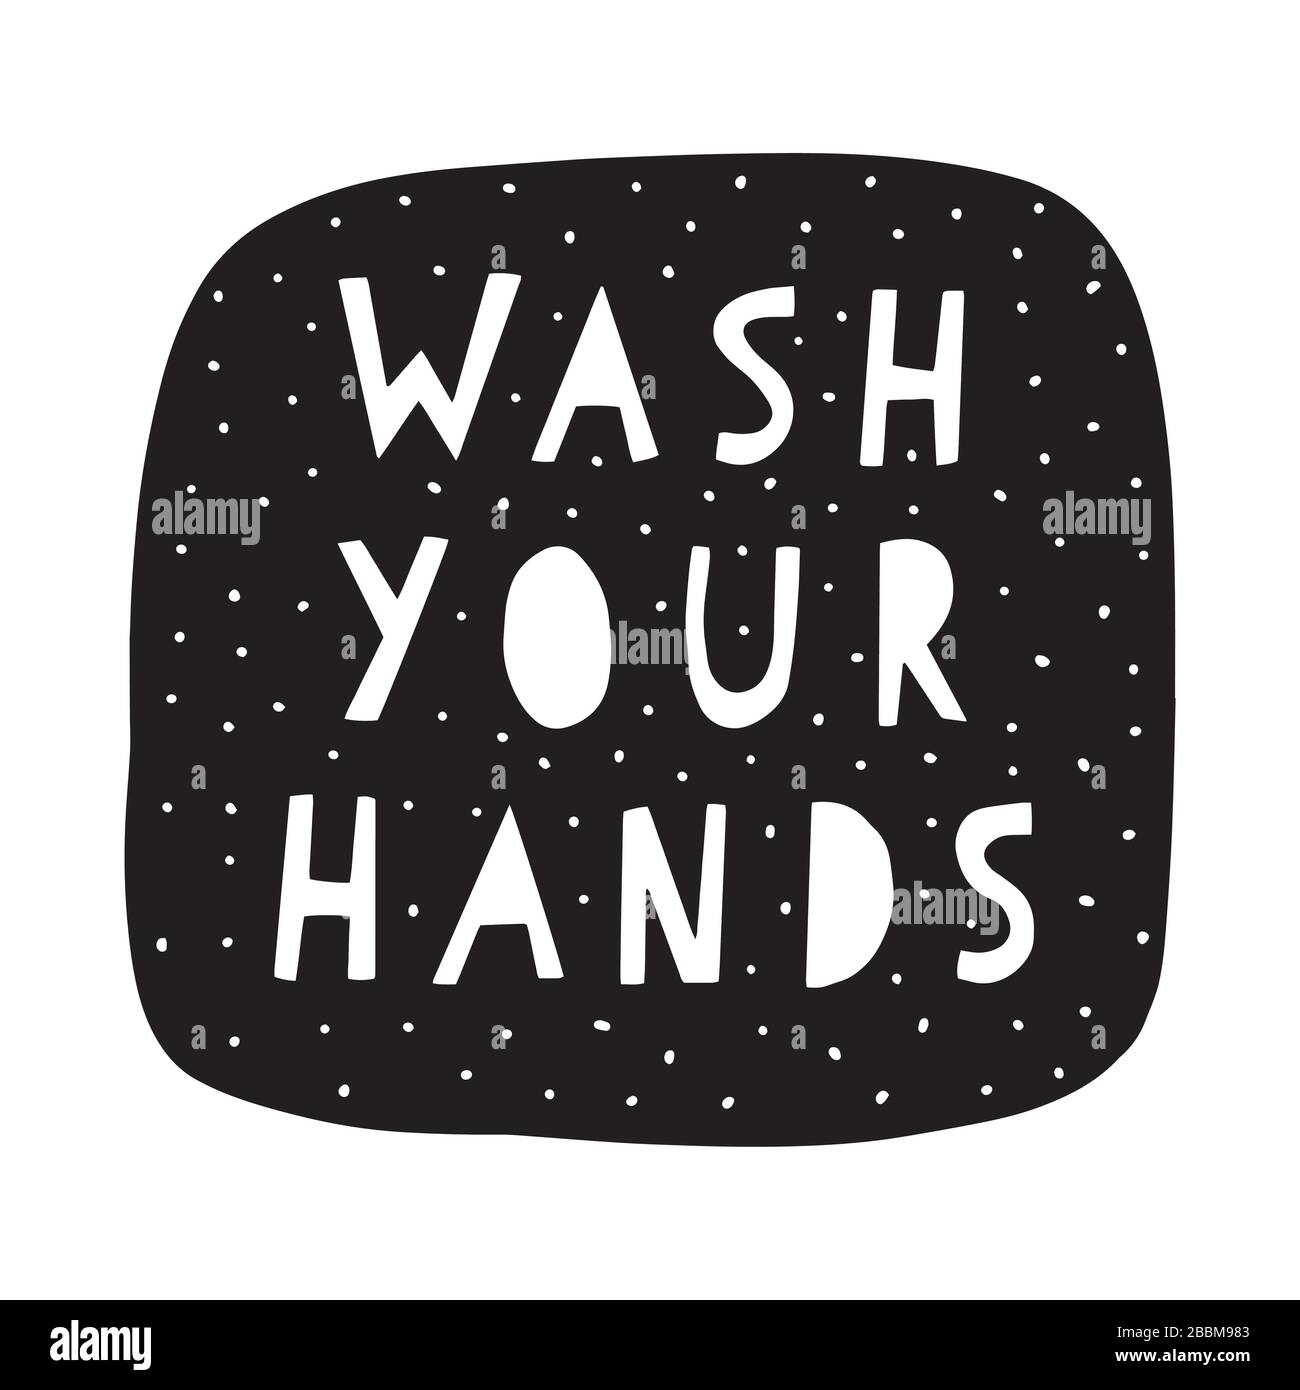 Wash your hands Typographic vector design poster template in black and white on dots pattern background. Scandinavian style hand drawn sticker for Stock Vector